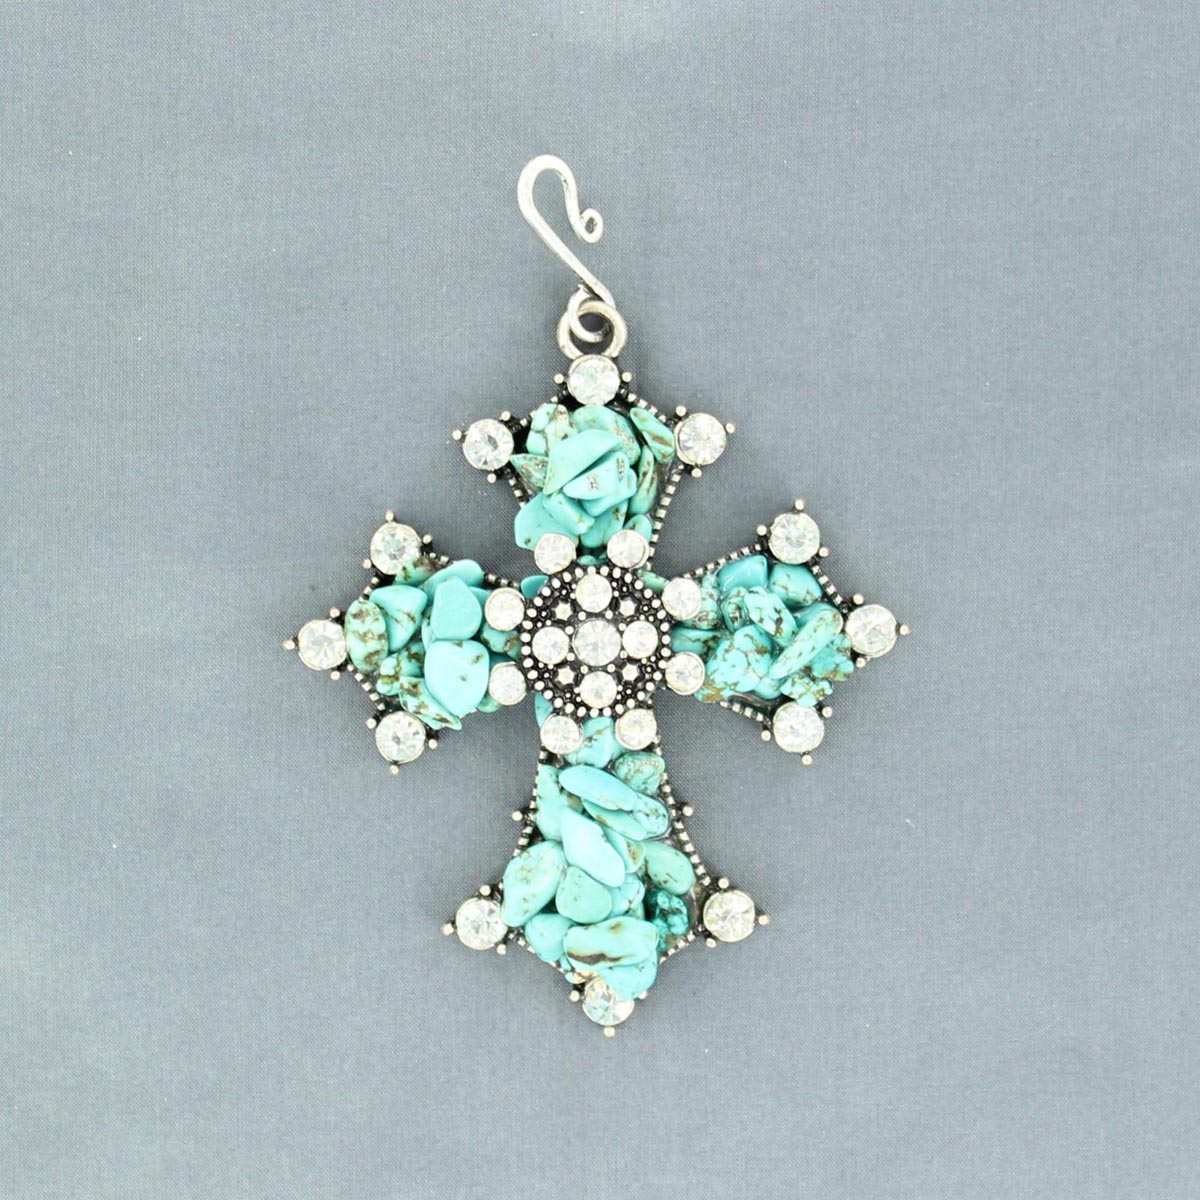 29761 Charm Cross With Crystals Hook Pendant, Turquoise